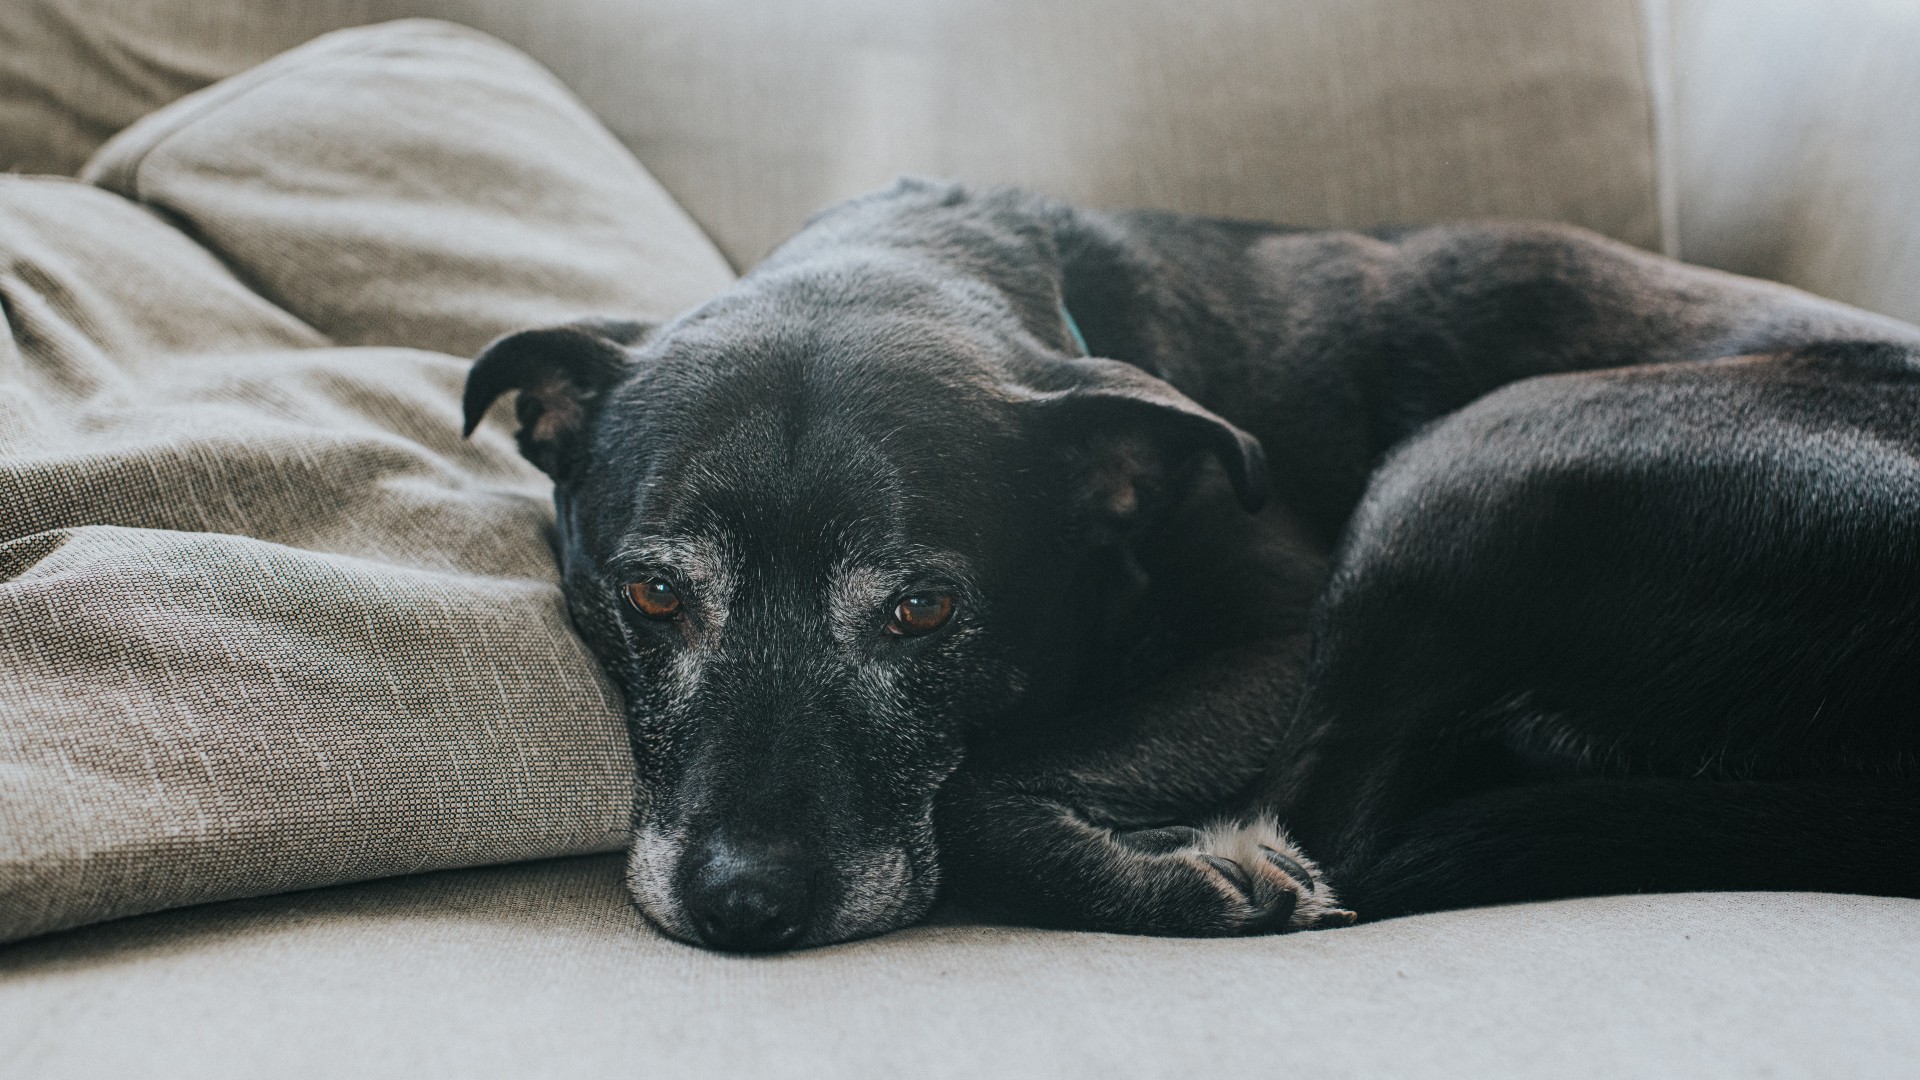 What are the signs a dog is dying?